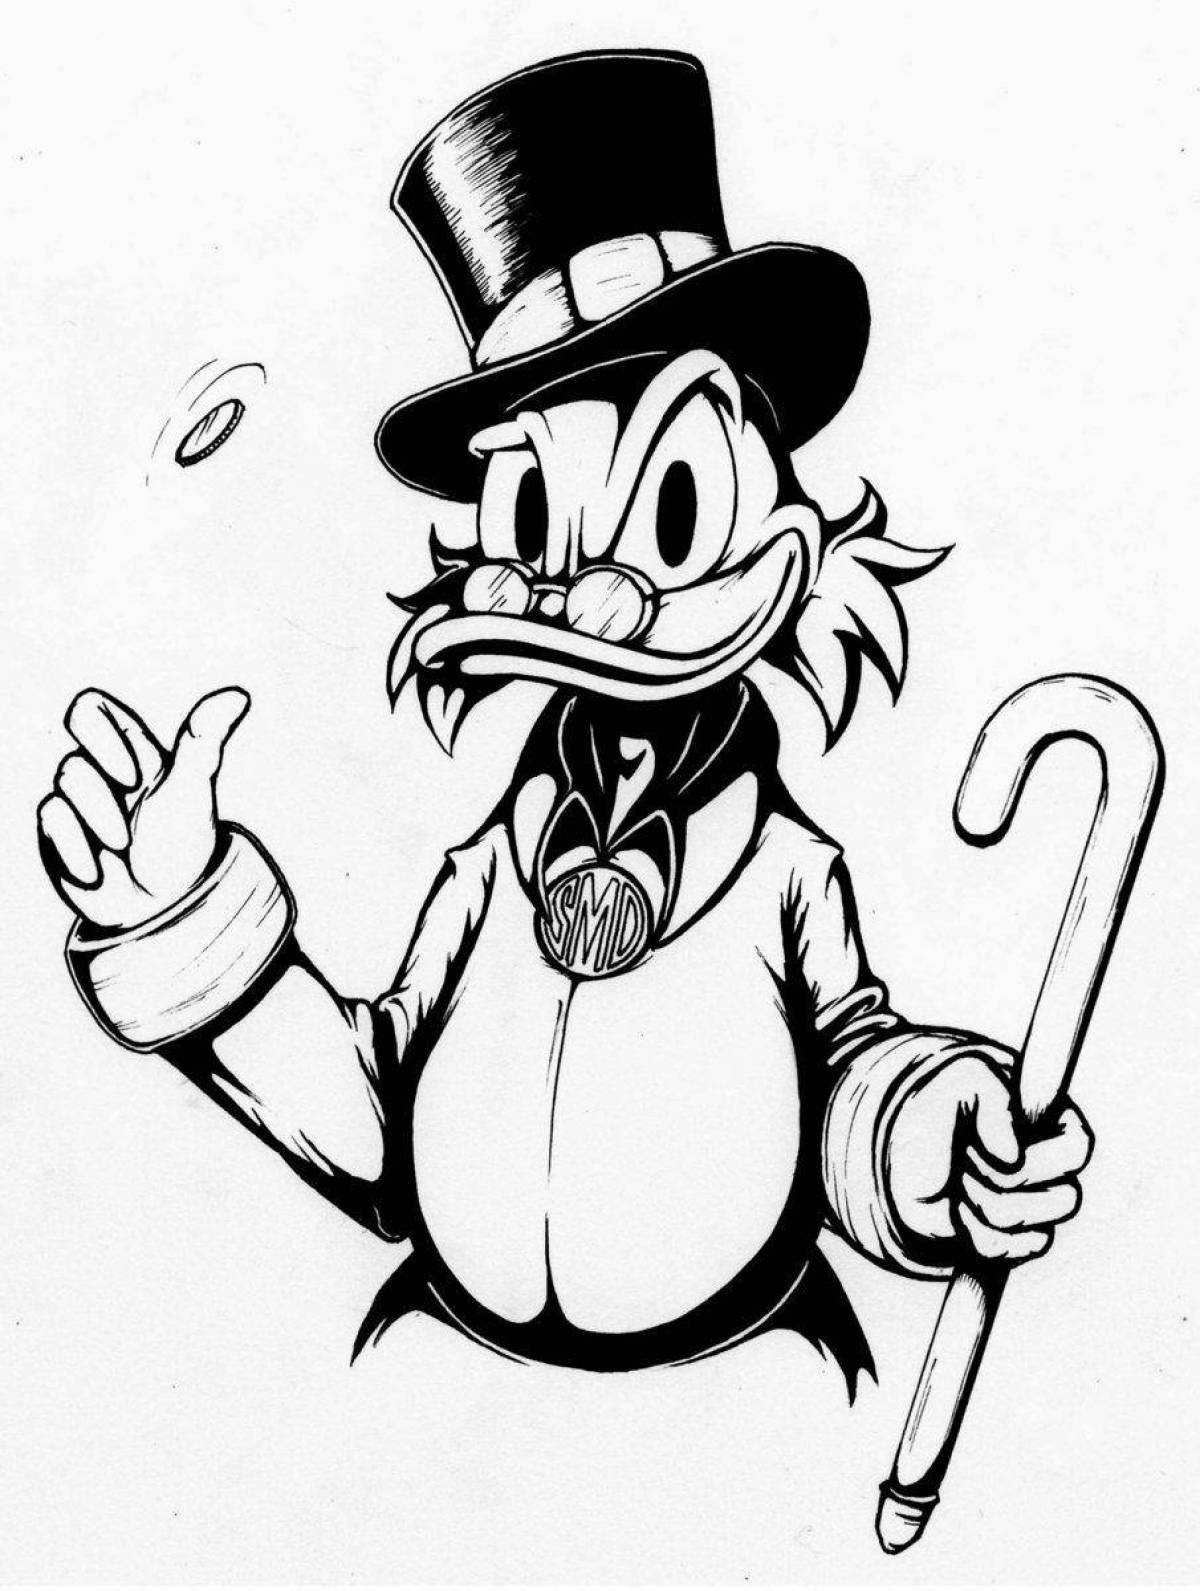 Dazzling twist mcduck coloring page